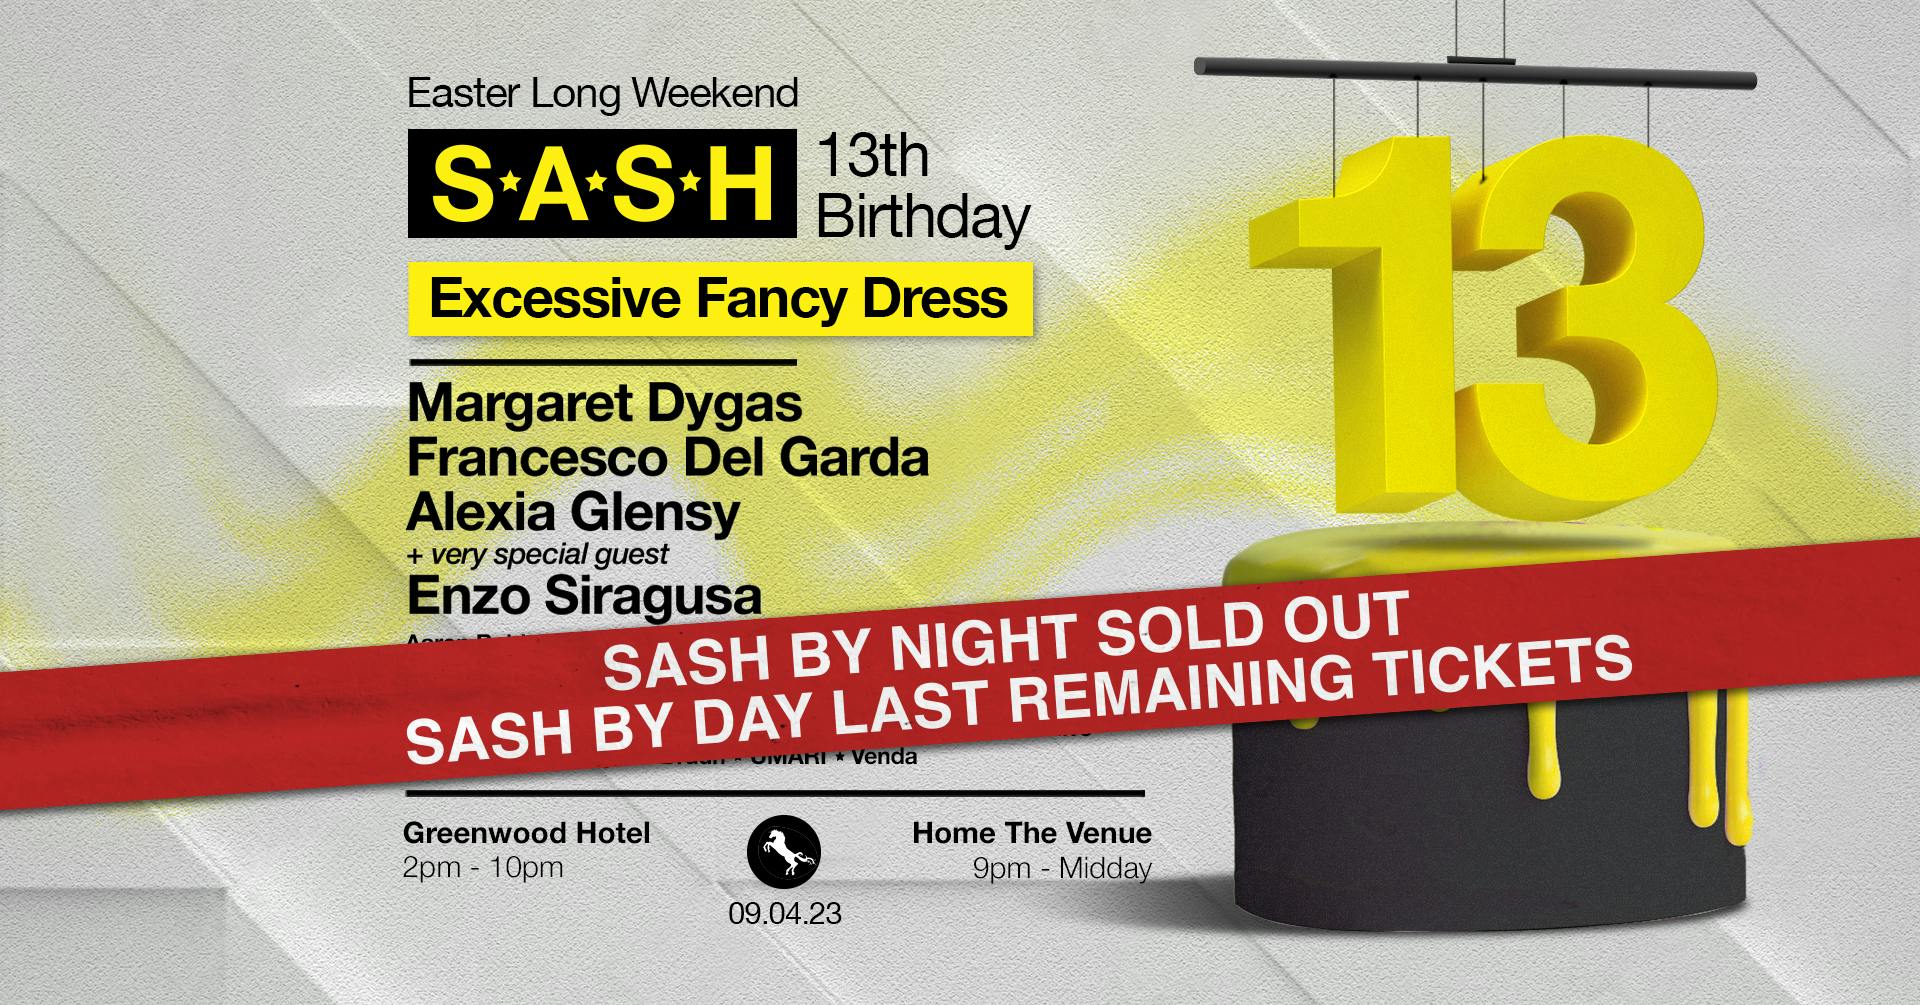 ★ S*A*S*H 13th Birthday ★ Easter Long Weekend ★ Excessive Fancy Dress ★